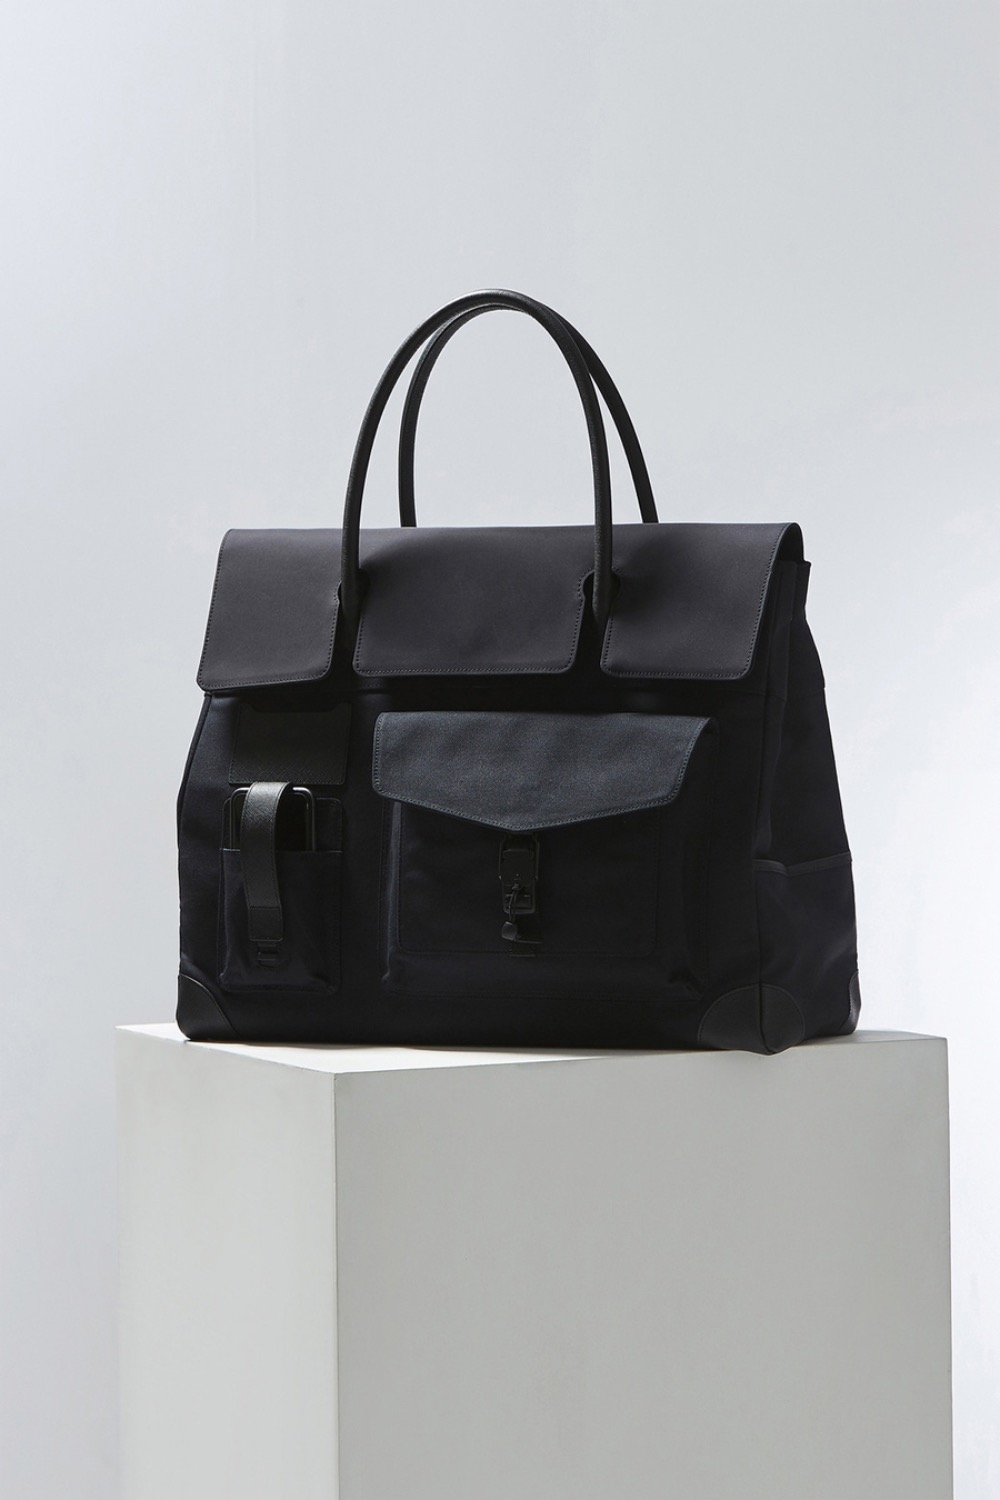 LOAD OUT TOTE BLACK